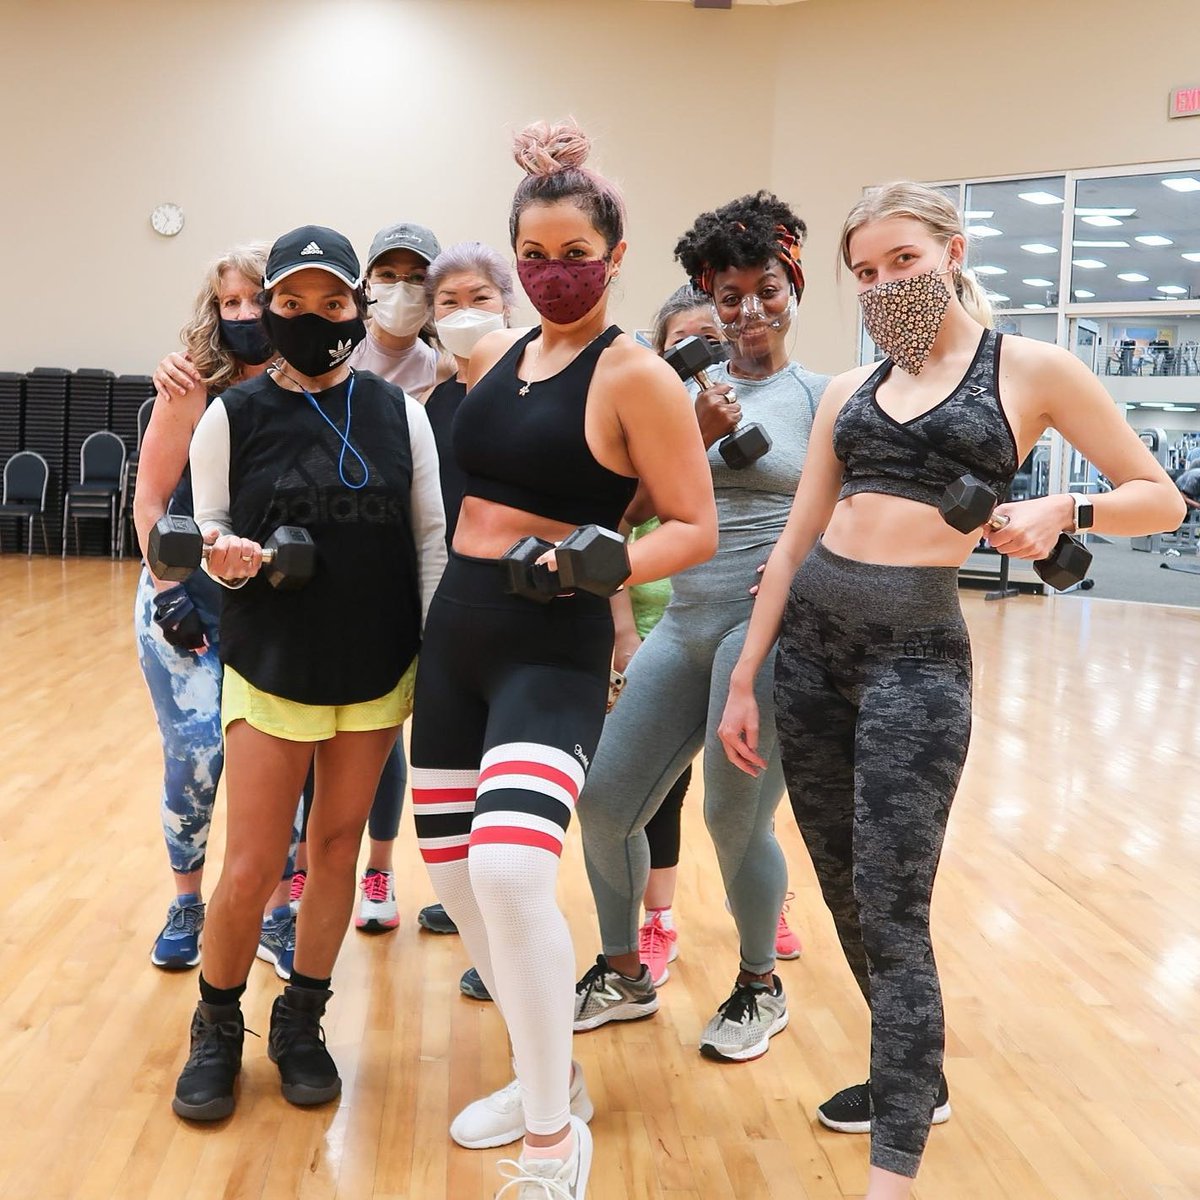 LA Fitness on X: 🎵 Oh yes it's ladies night and the feelings right! 🎵⁠ ⁠  We ❤️ our strong women of LA Fitness!! 🔥 ⁠ ⁠ 📷 @mironenergy #groupfitness  #ladiesnight #fitwomen #